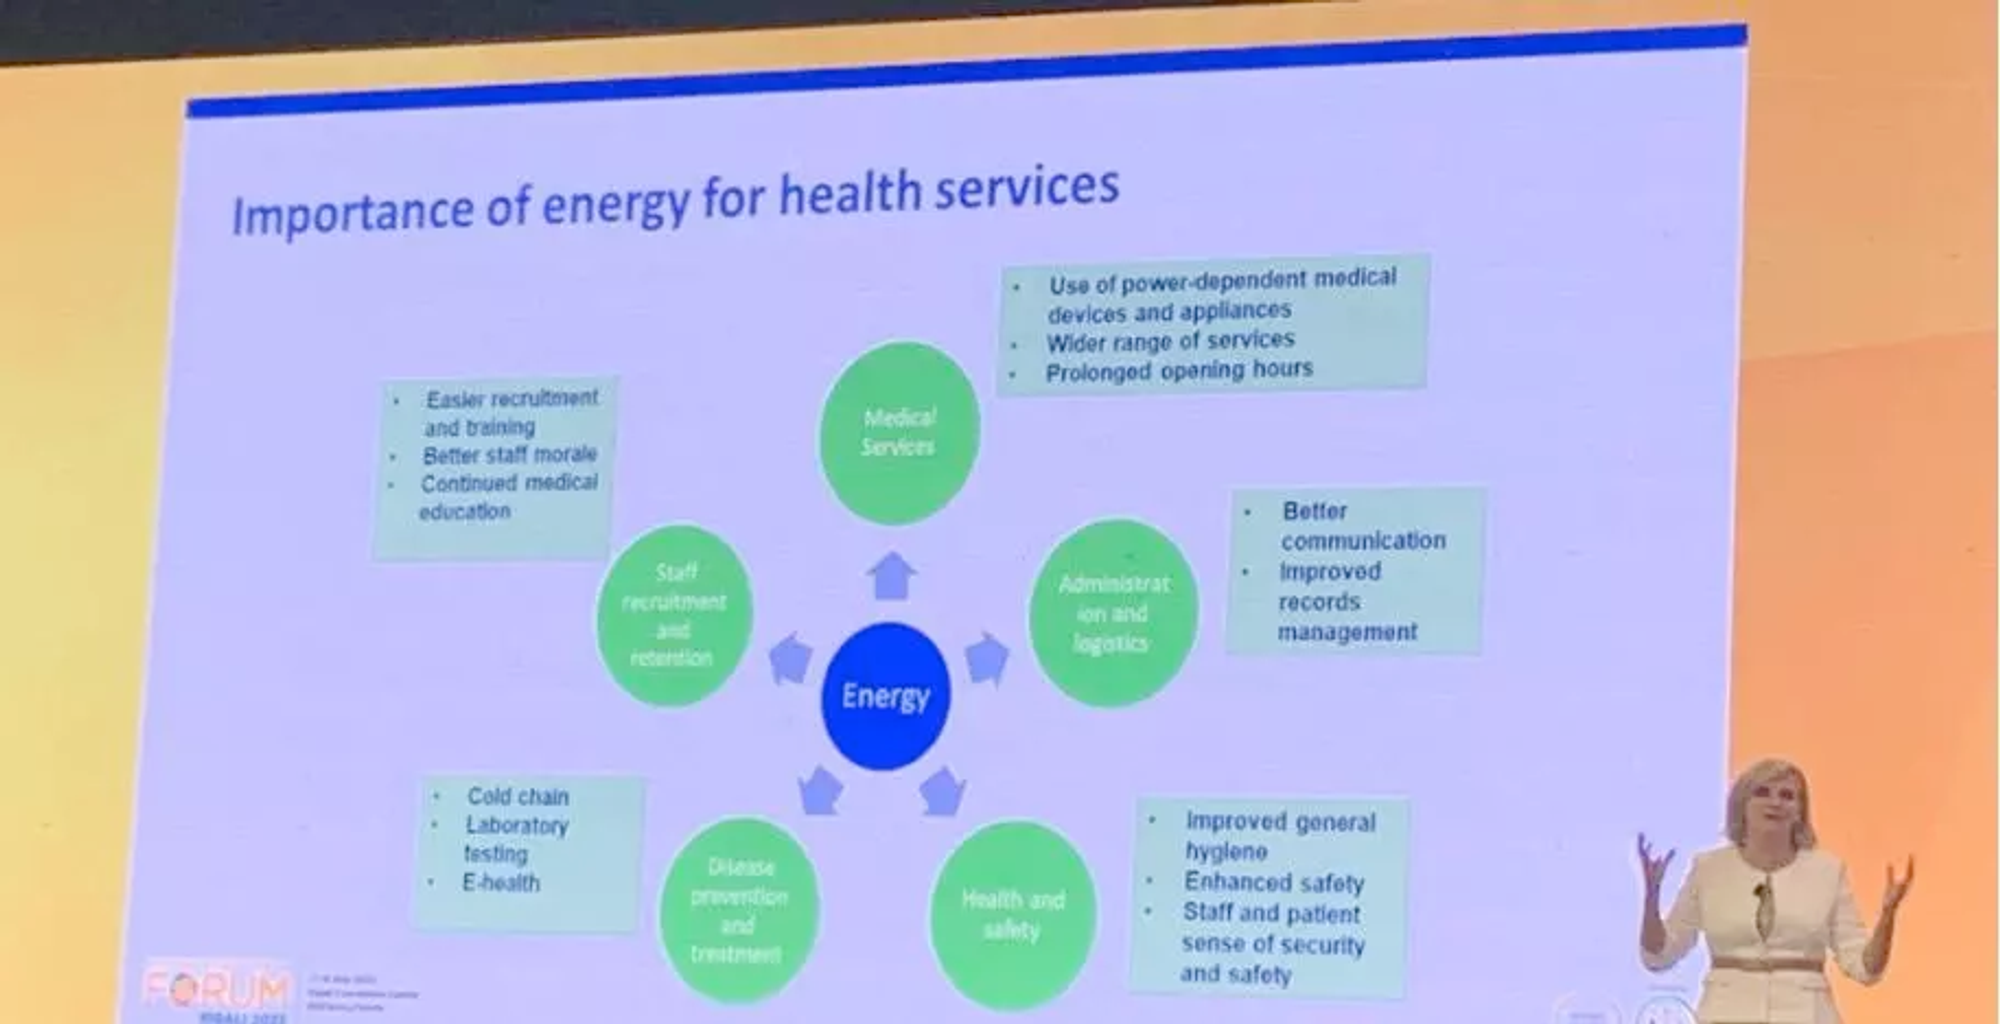 Dr. Maria P. Neira (Director of the Department of Environment, Climate Change and Health at the WHO) presenting at the Sustainable Energy for All (SEforALL) Forum session “Powering Healthcare During and Beyond a Pandemic”.